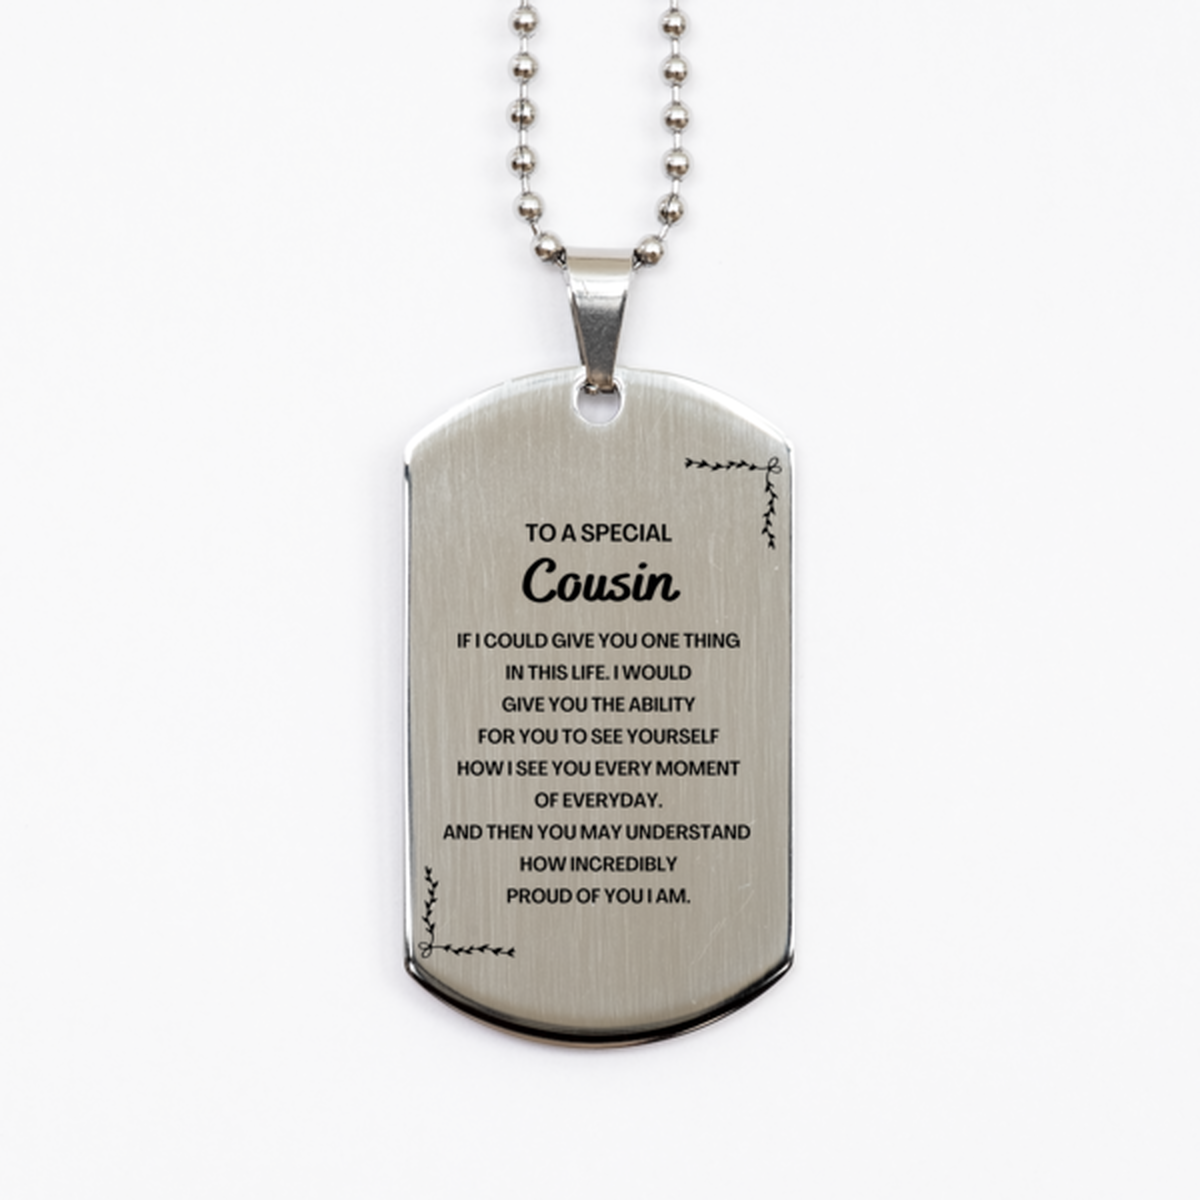 To My Cousin Silver Dog Tag, Gifts For Cousin Engraved, Inspirational Gifts for Christmas Birthday, Epic Gifts for Cousin To A Special Cousin how incredibly proud of you I am